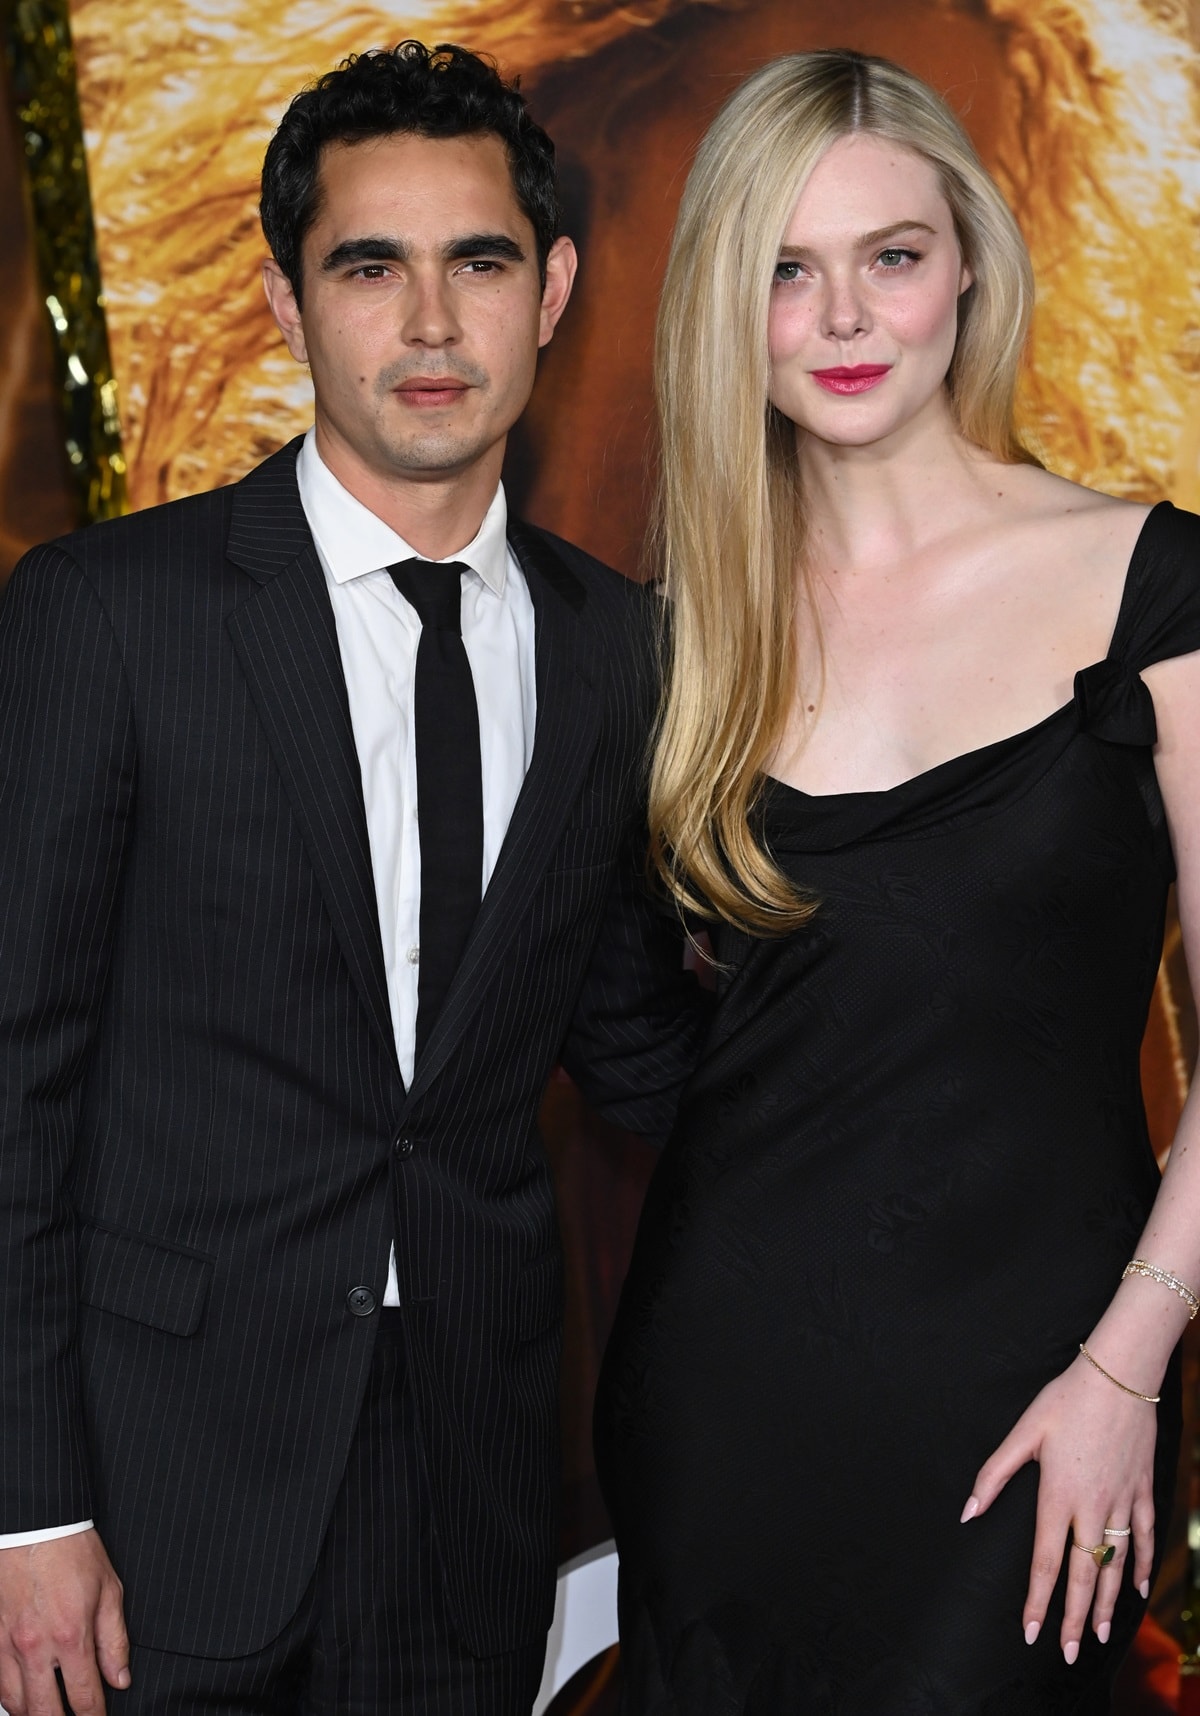 Elle Fanning, with a height of 5ft 8 ½ (174 cm), is slightly shorter than Max Minghella, who measures 5ft 9 (175.3 cm), but often looks taller when wearing high heels